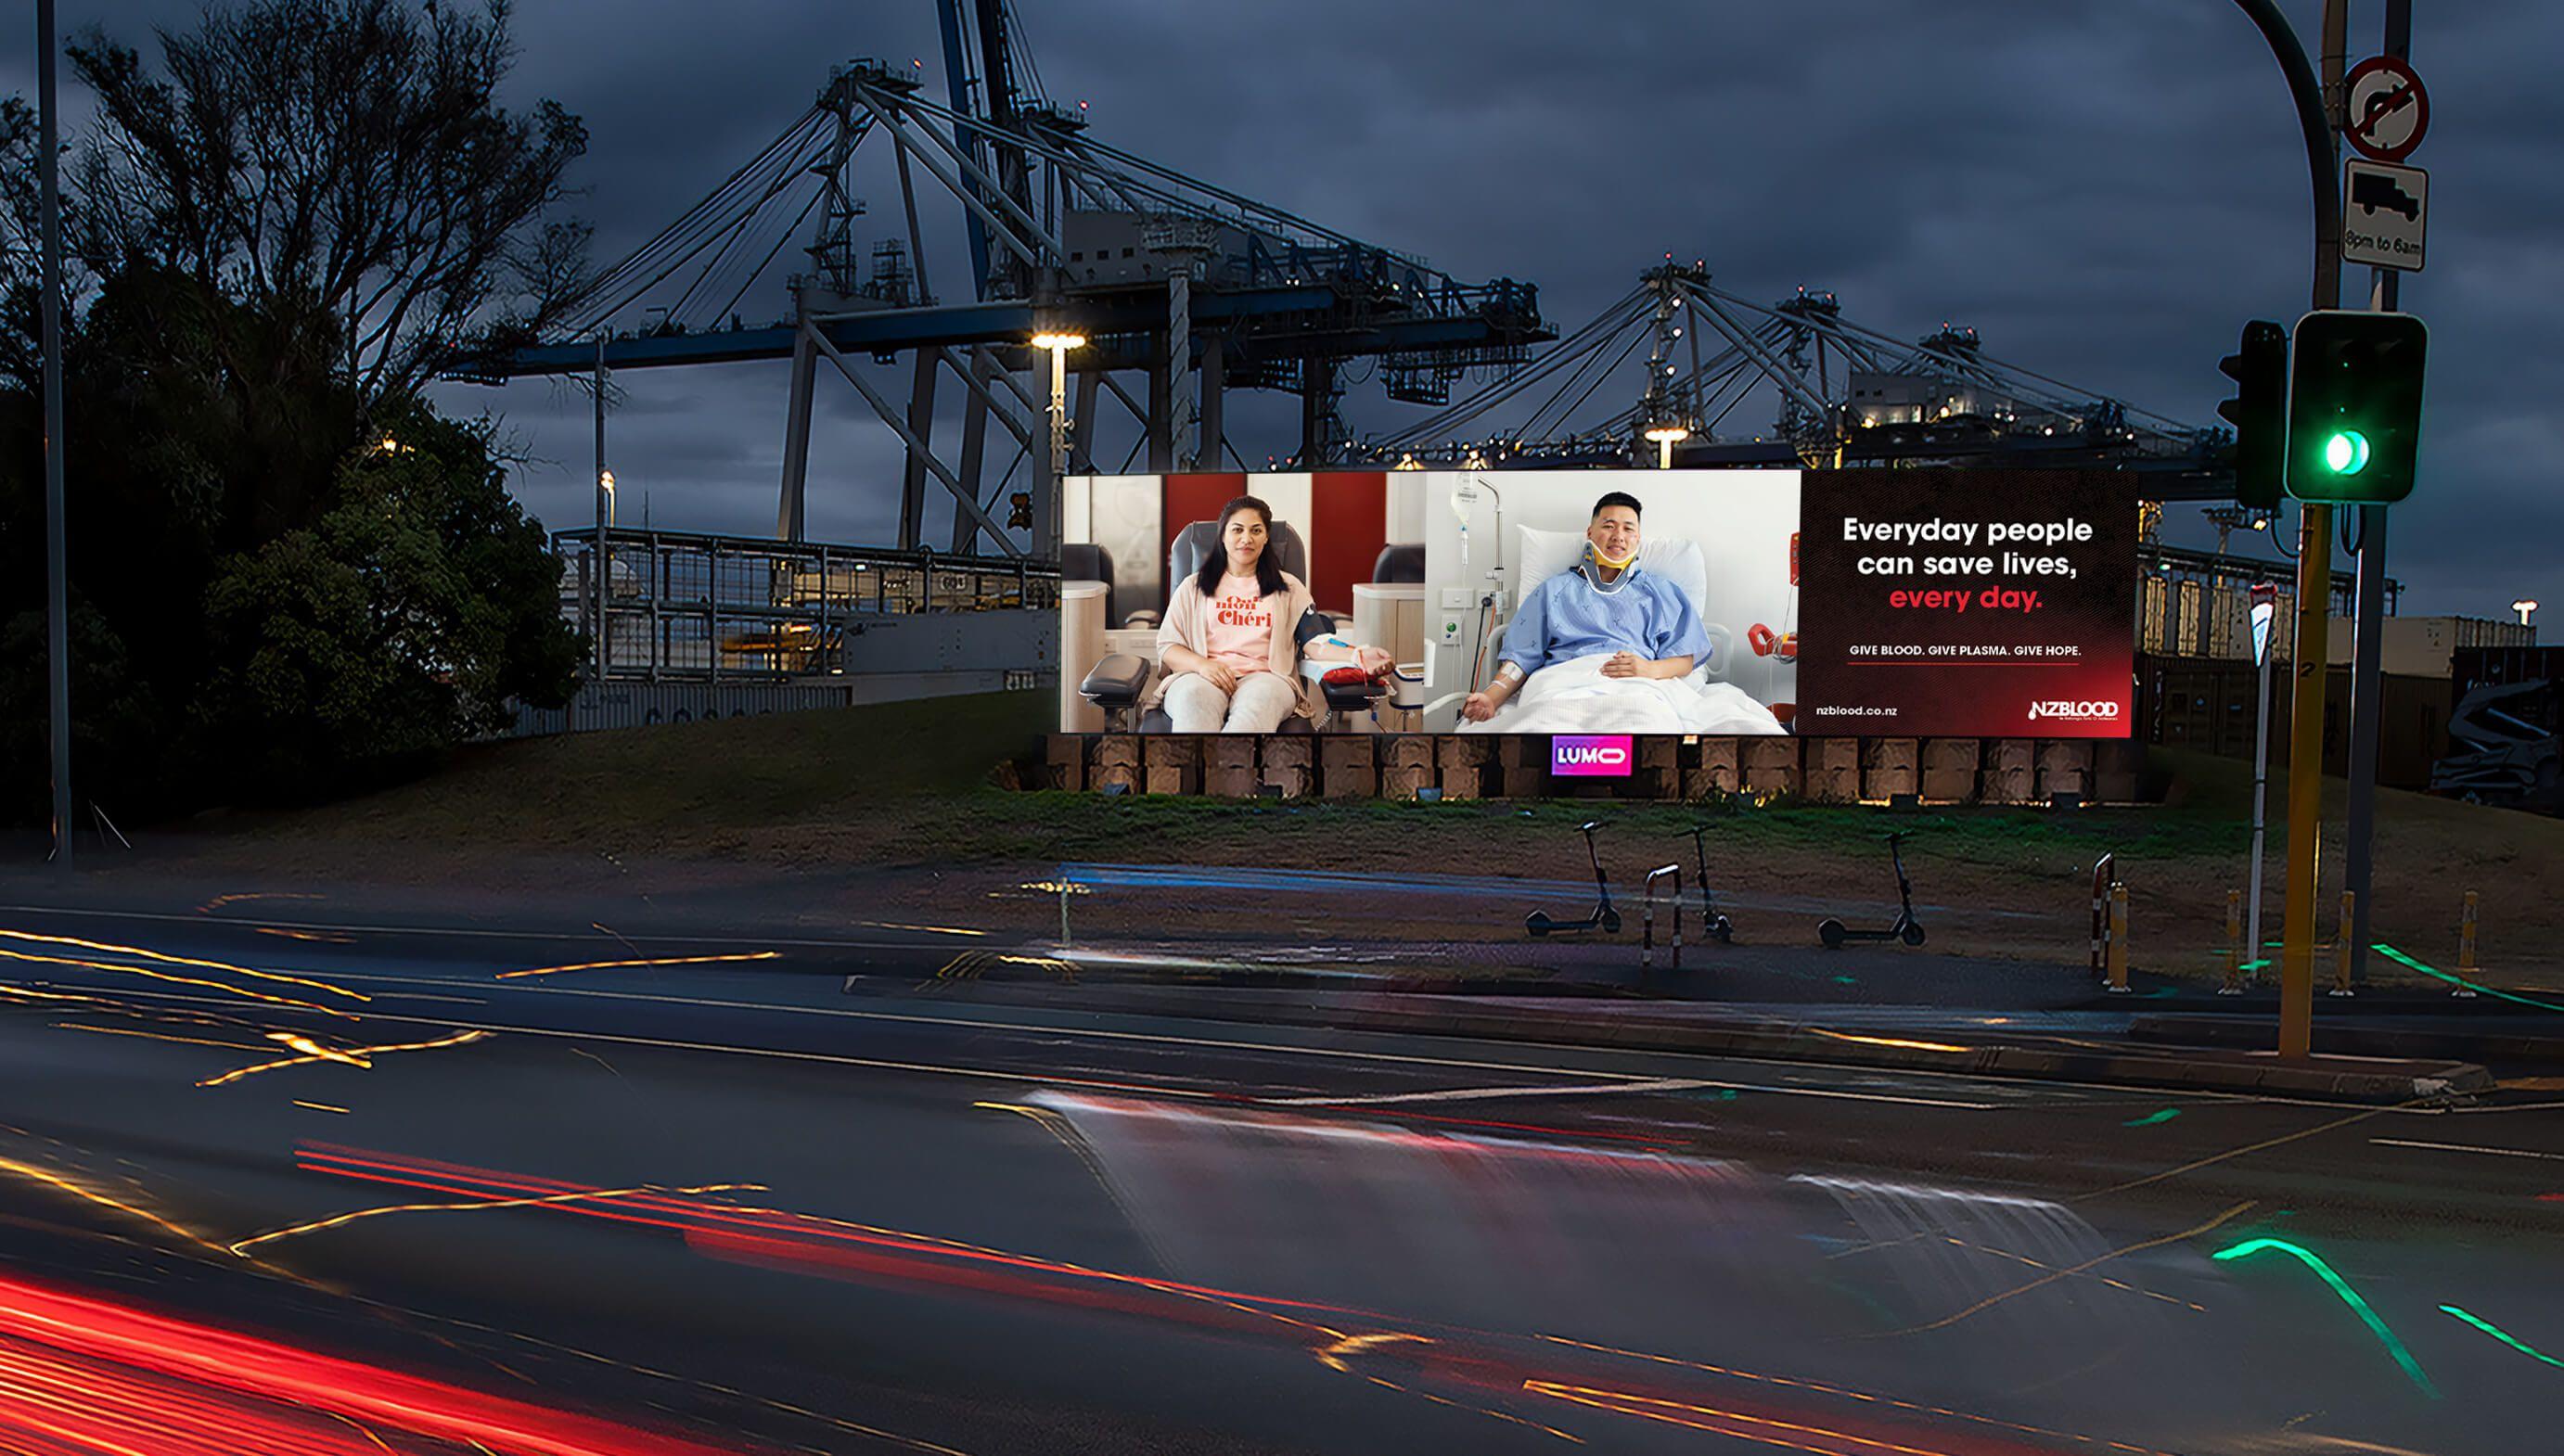 A photo of the print ad we produced for NZblood being delivered on an electronic billboard.